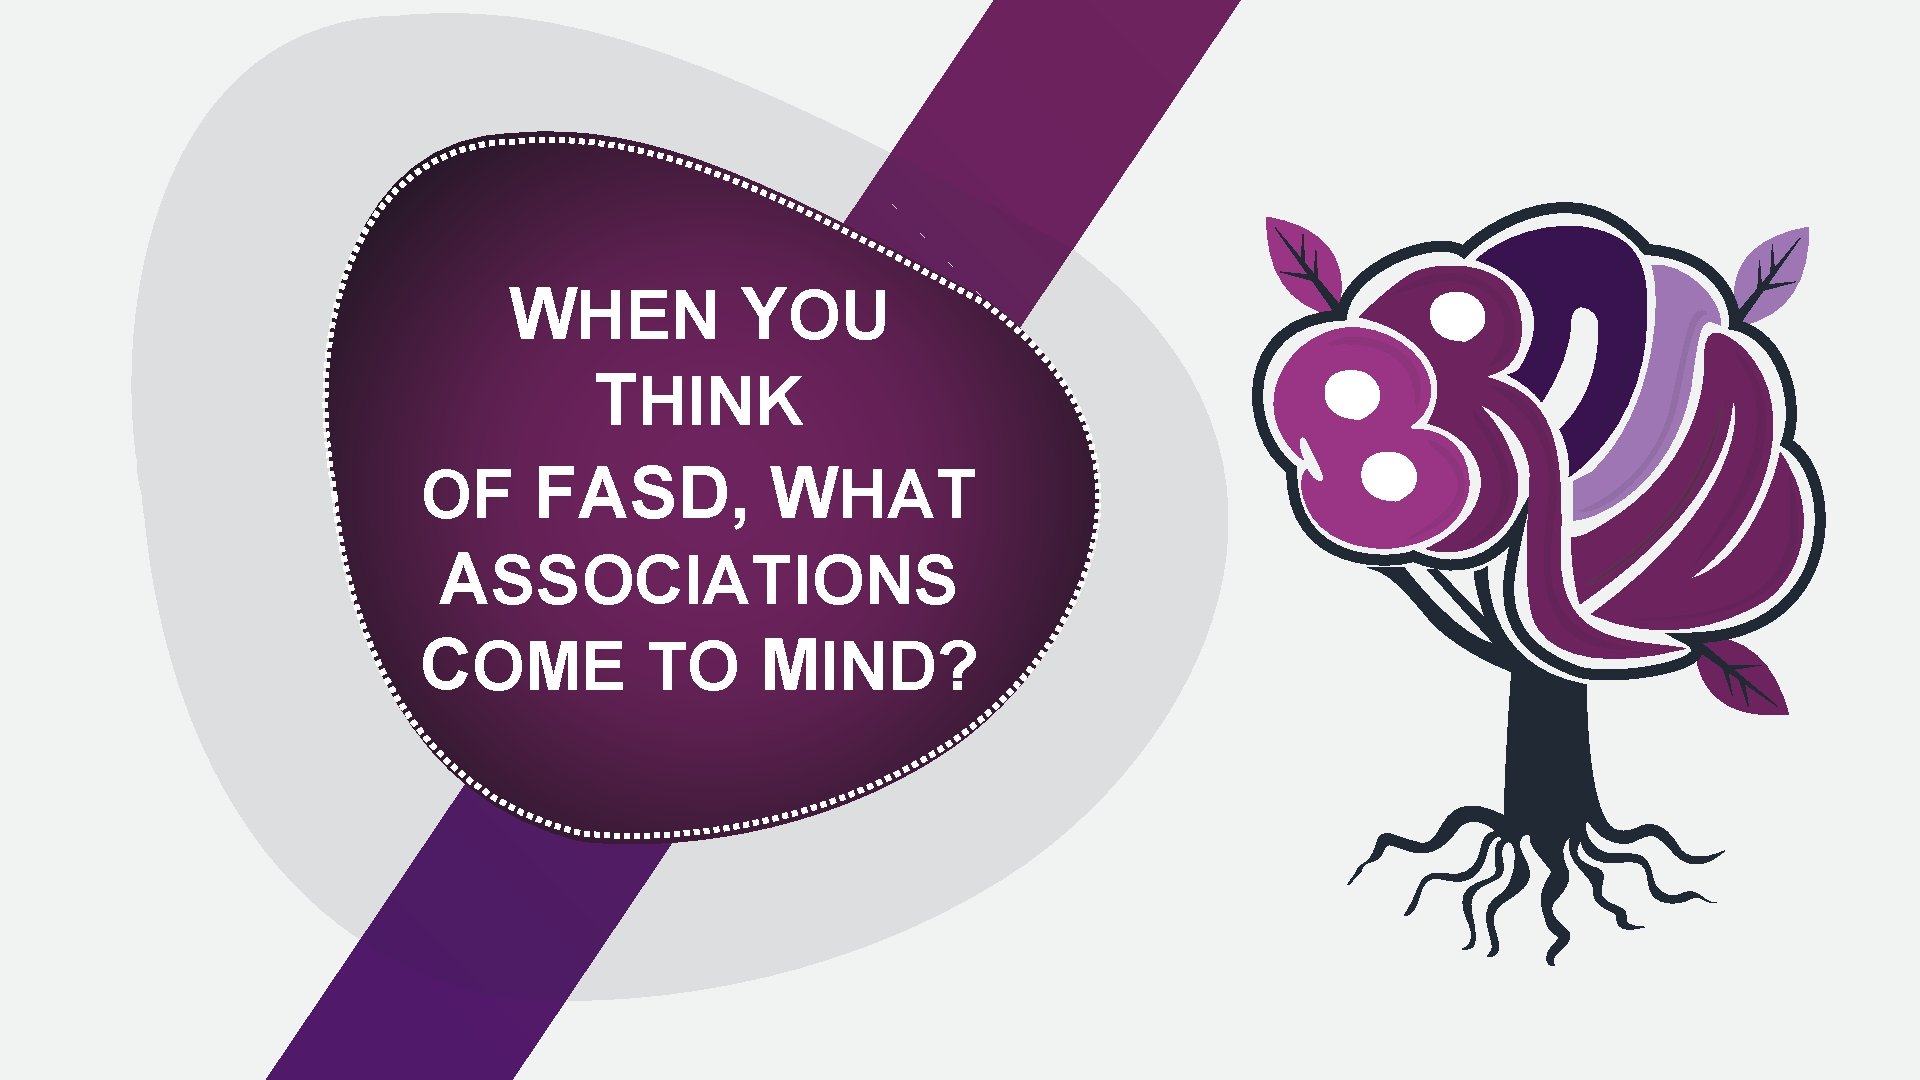 WHEN YOU THINK OF FASD, WHAT ASSOCIATIONS COME TO MIND? 